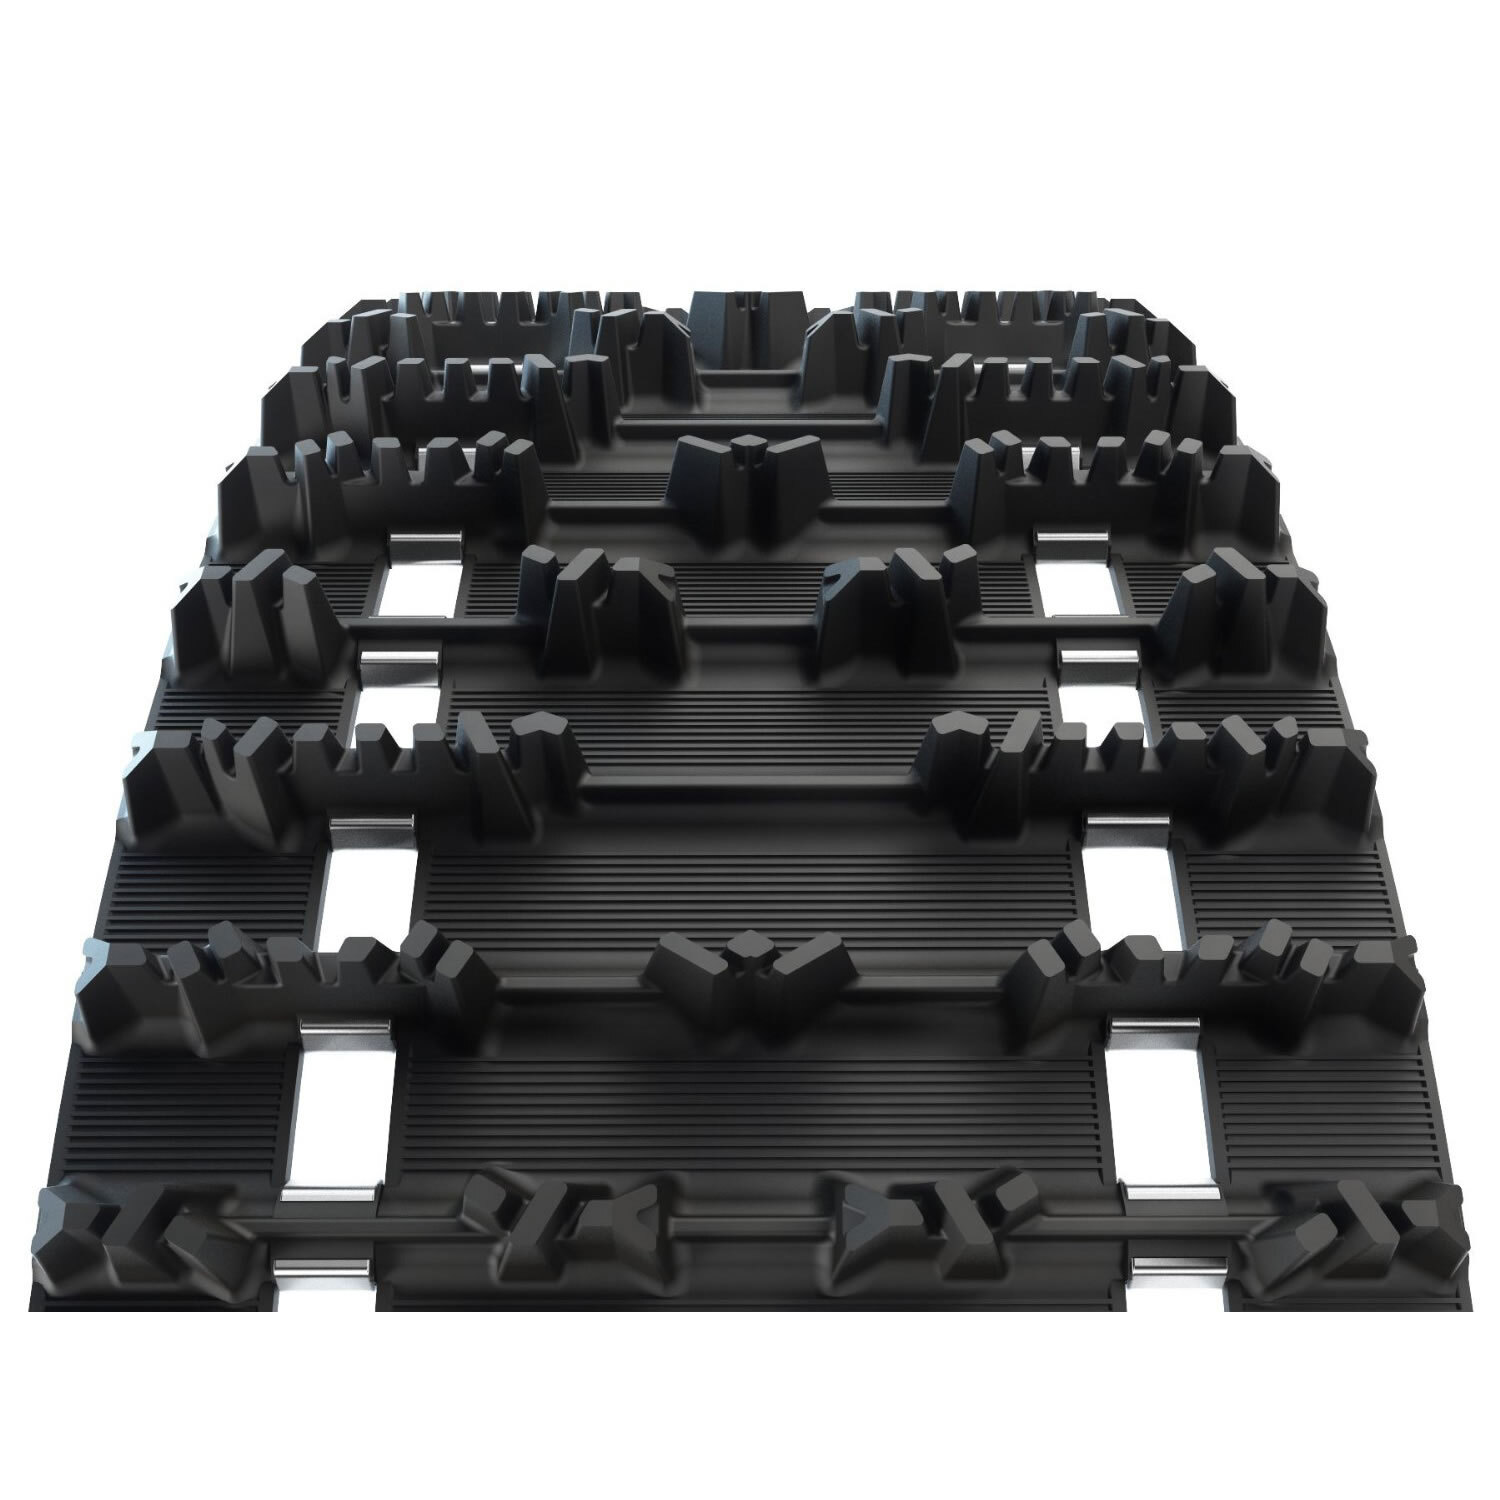 Camso® RipSaw Track